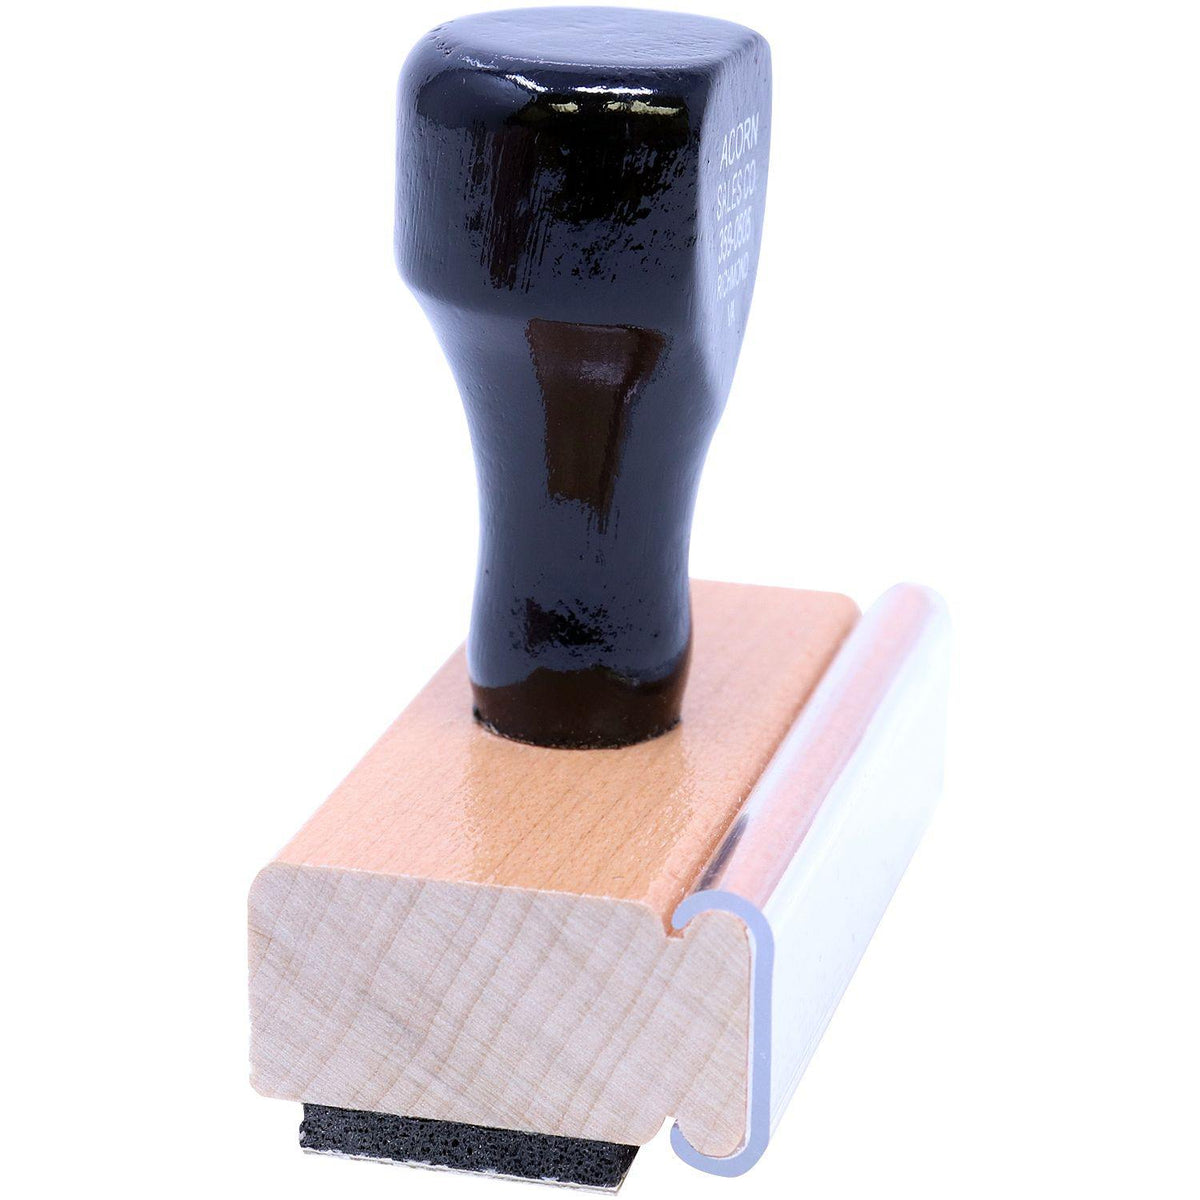 Side View of Account Closed Rubber Stamp at an Angle